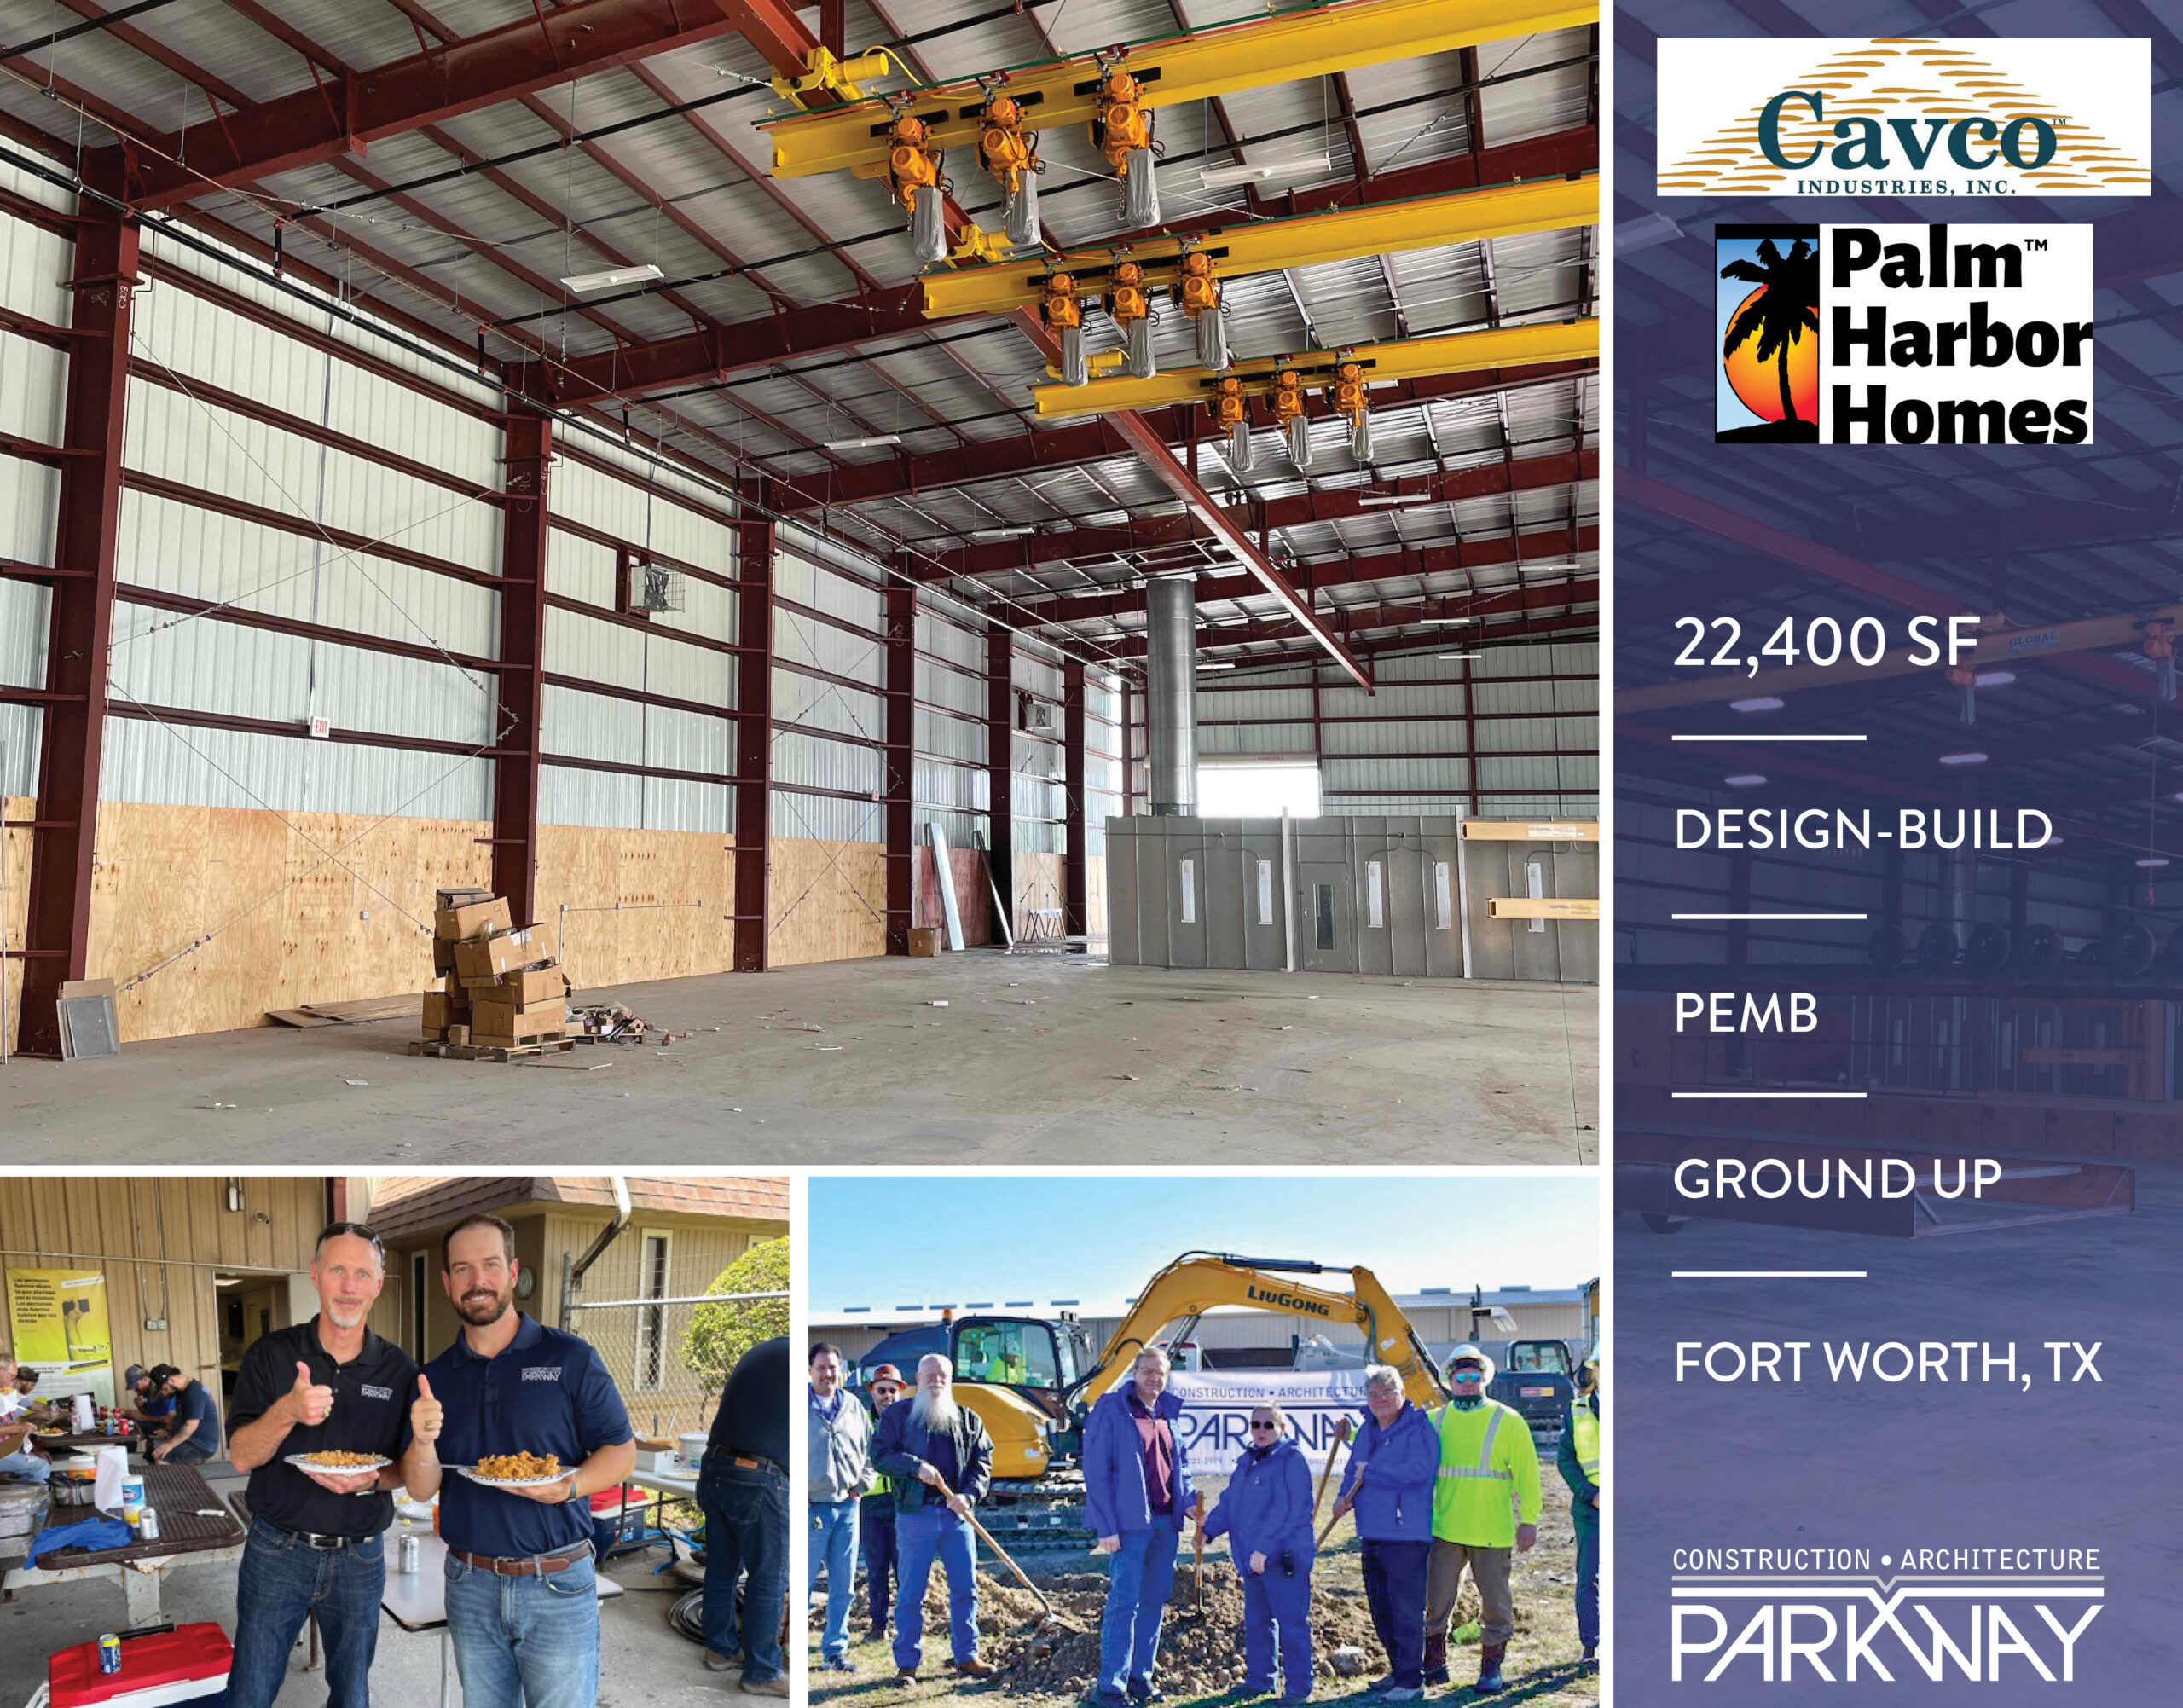 Palm Harbor Homes, Cavco Plant Expansion